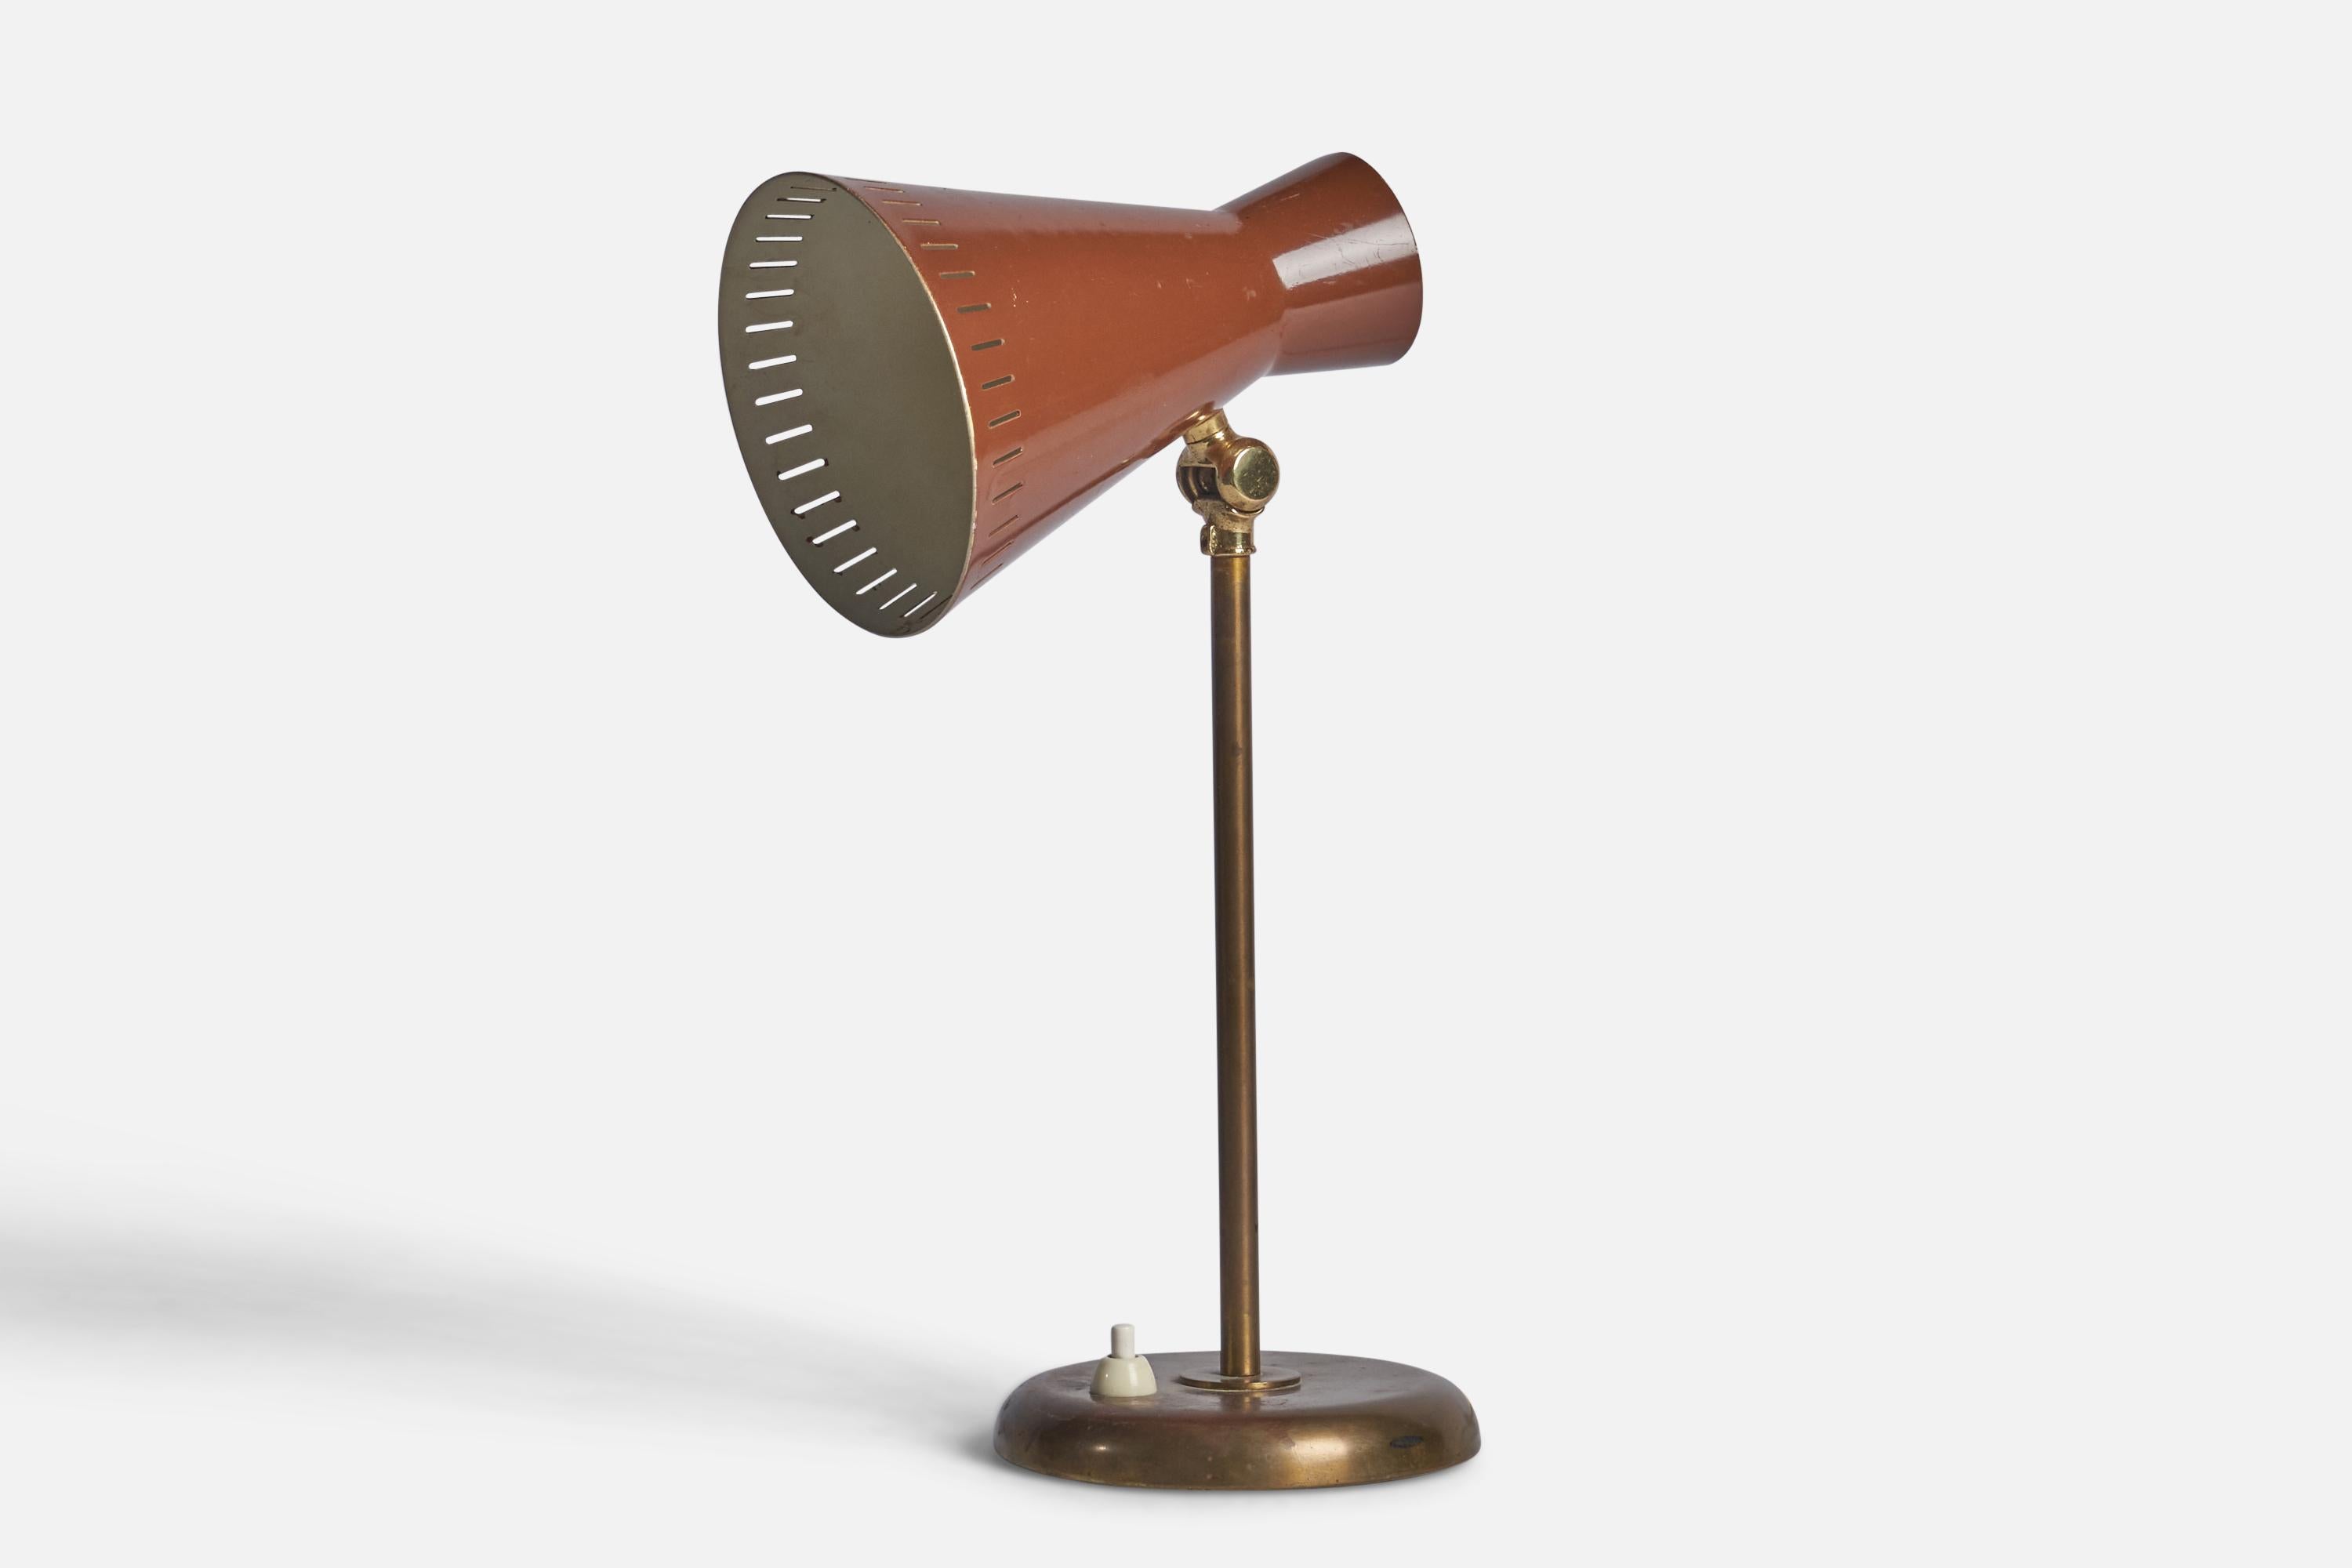 An adjustable brass and orange lacquered metal table lamp designed and produced by Böhlmarks, Sweden, c. 1940s.
Overall Dimensions (inches): 13.5” H, 4.5” diameter of the base.
Dimensions variable based on position
Bulb Specifications: E-14